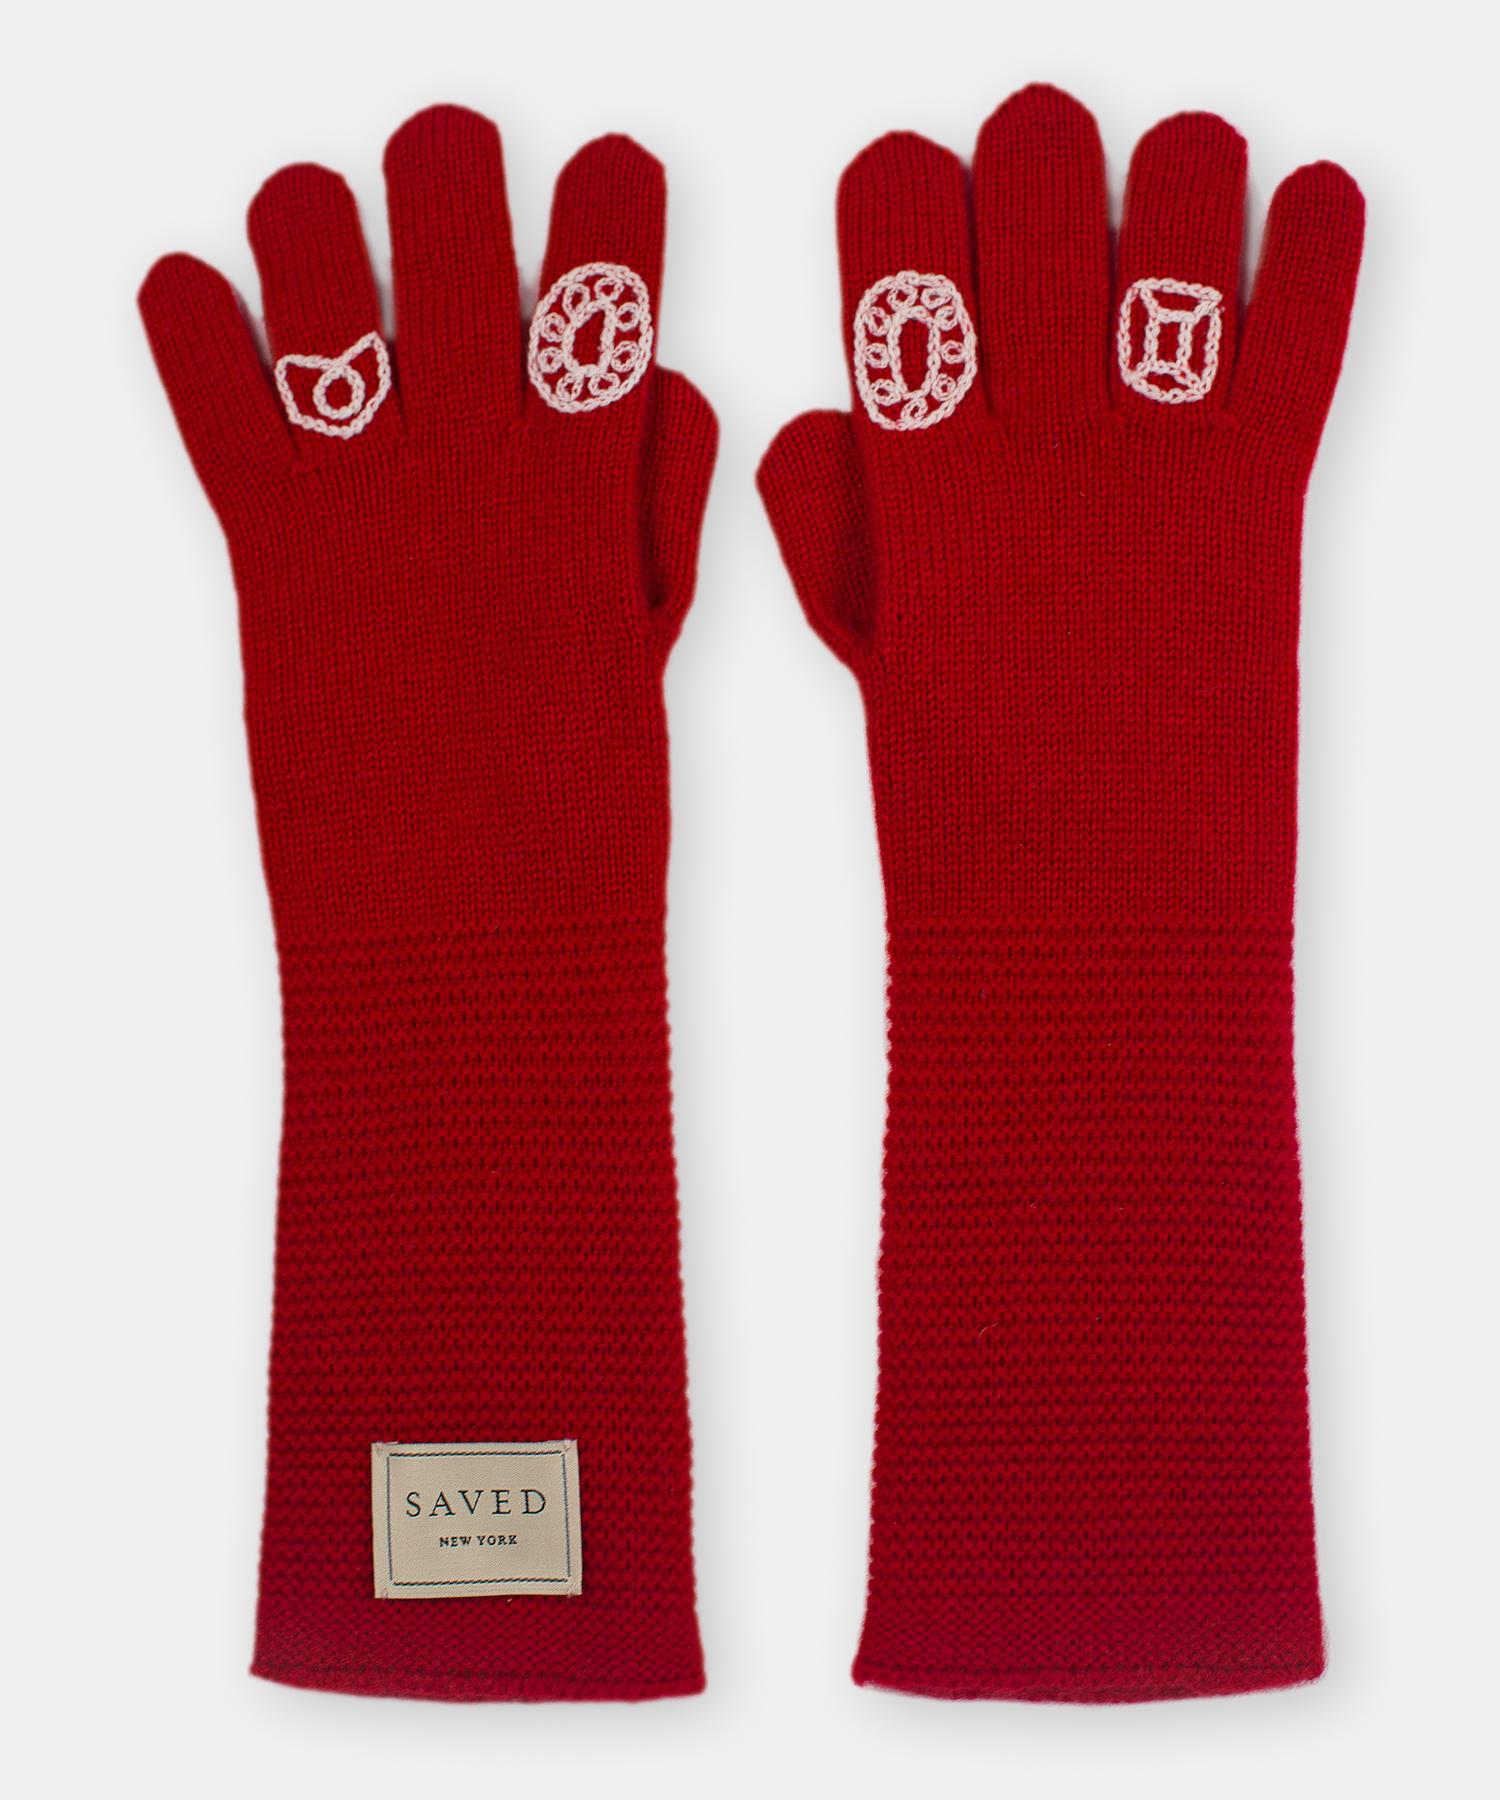 Mongolian Red Opera Gloves by Saved, New York